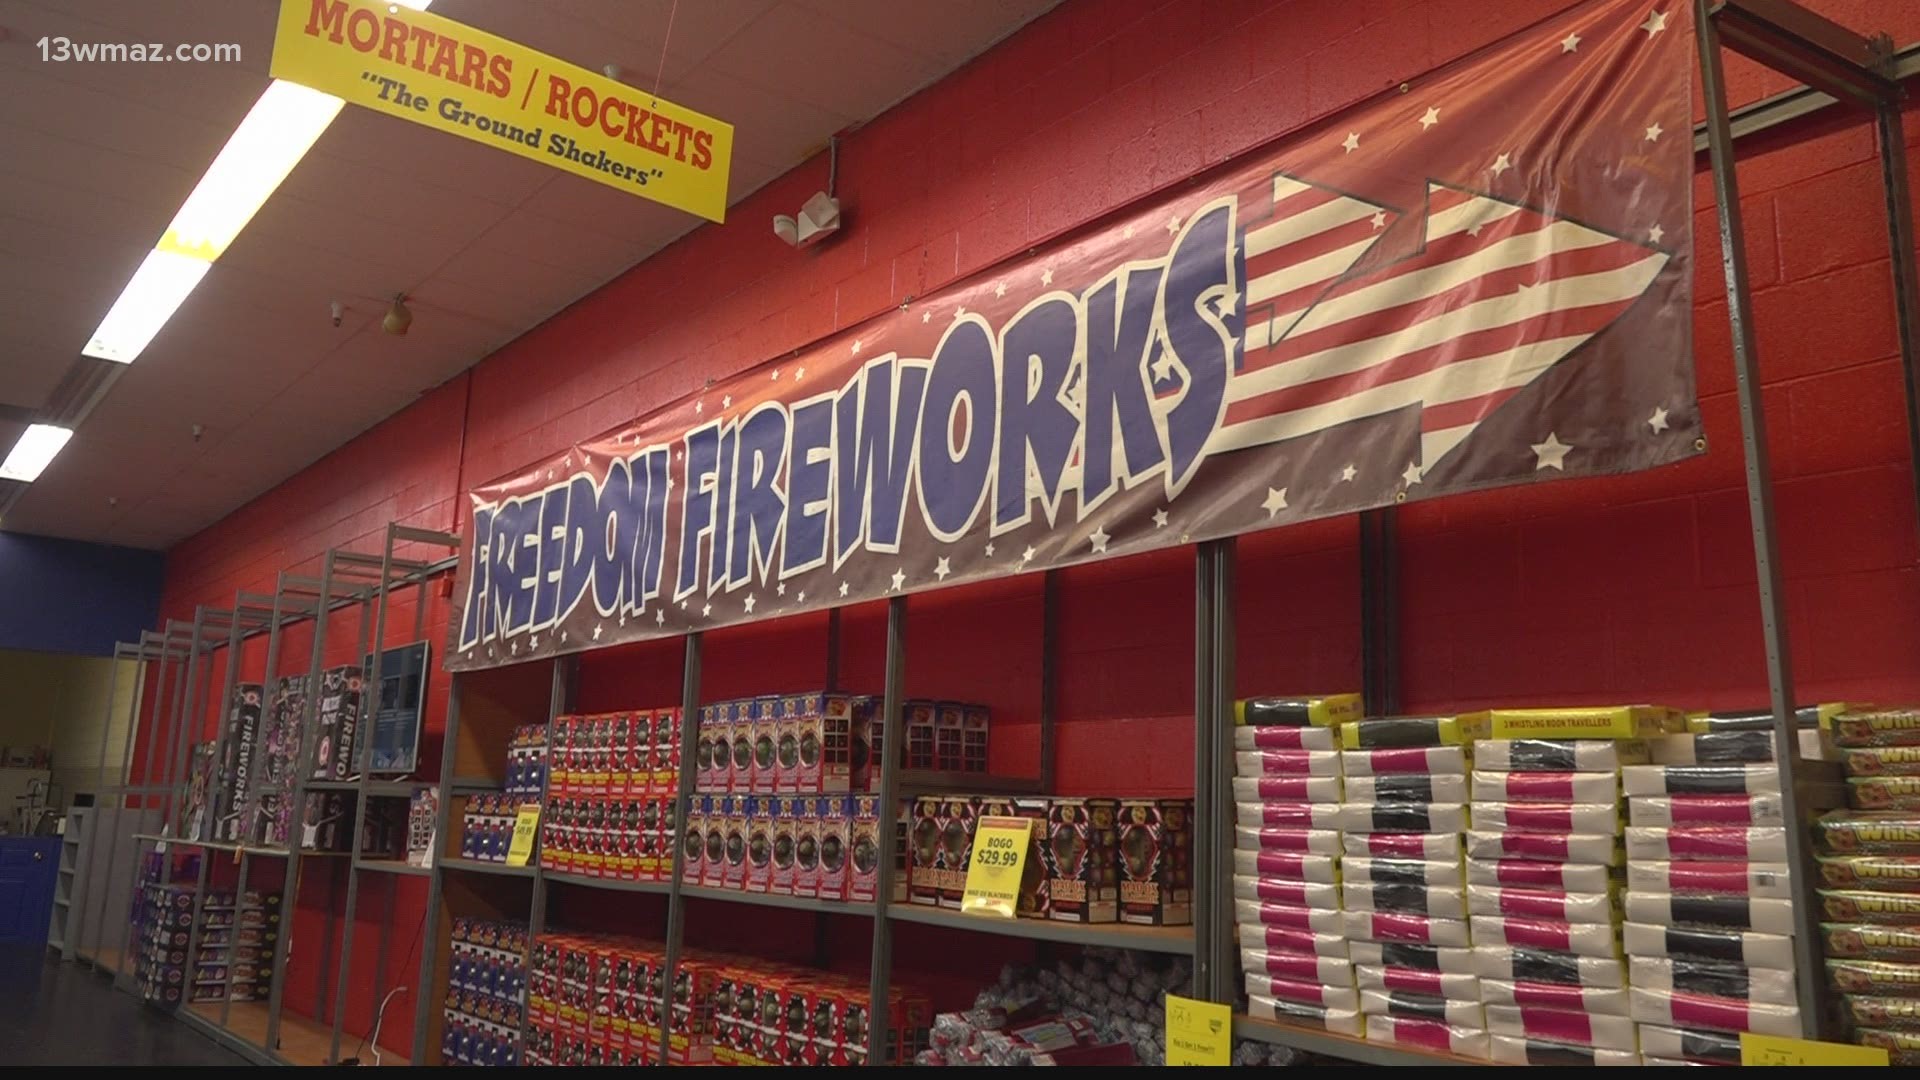 The shortage stems from a slow down of both production and shipping of fireworks since last year's surge in sales.